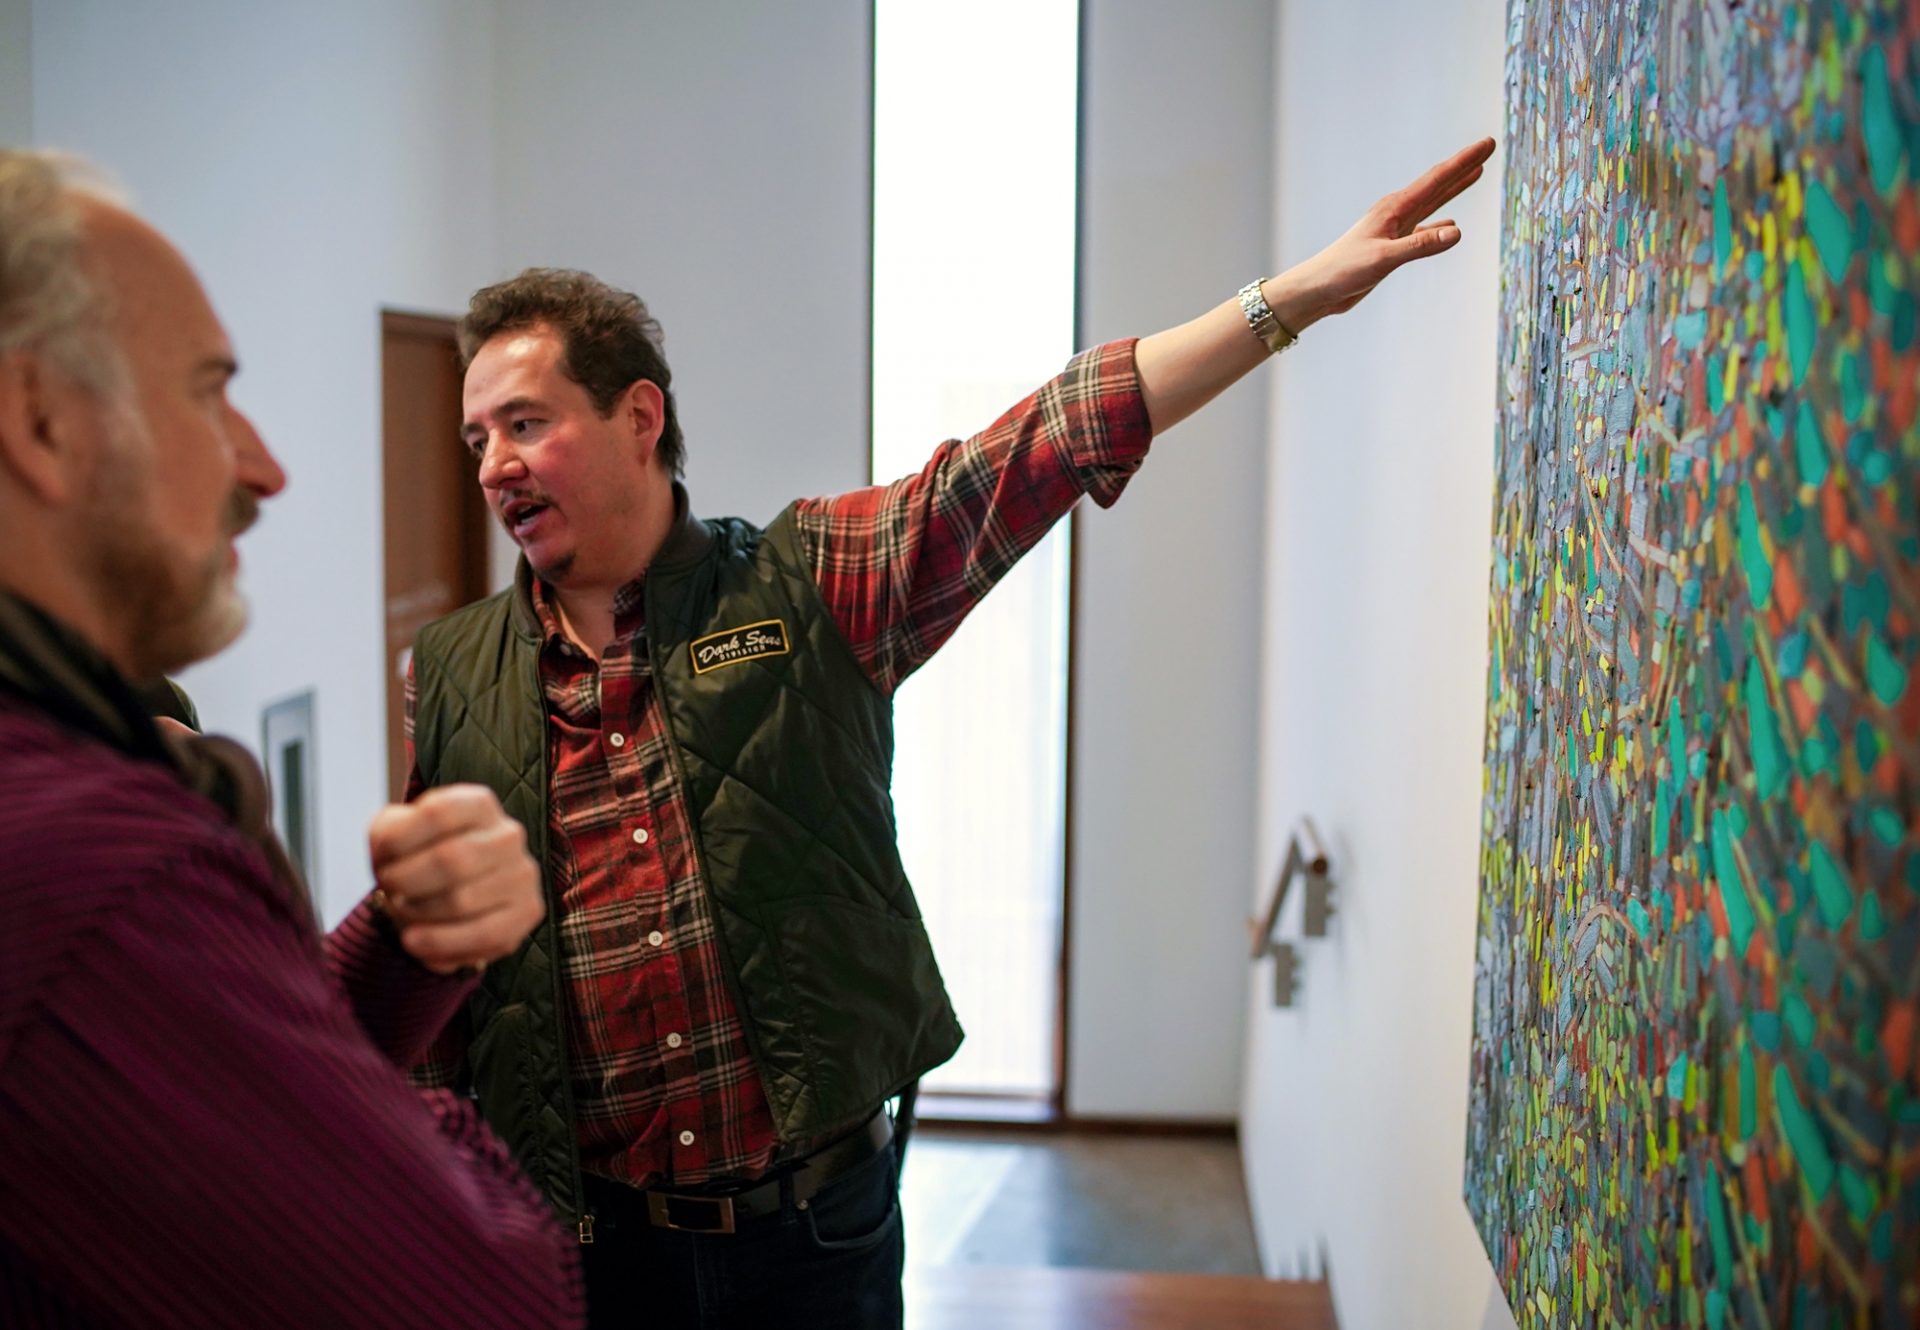 Artist Bewabon Shilling provided tour of his exhibition, Between the Forest and the Sky, at the MacLaren Art Centre